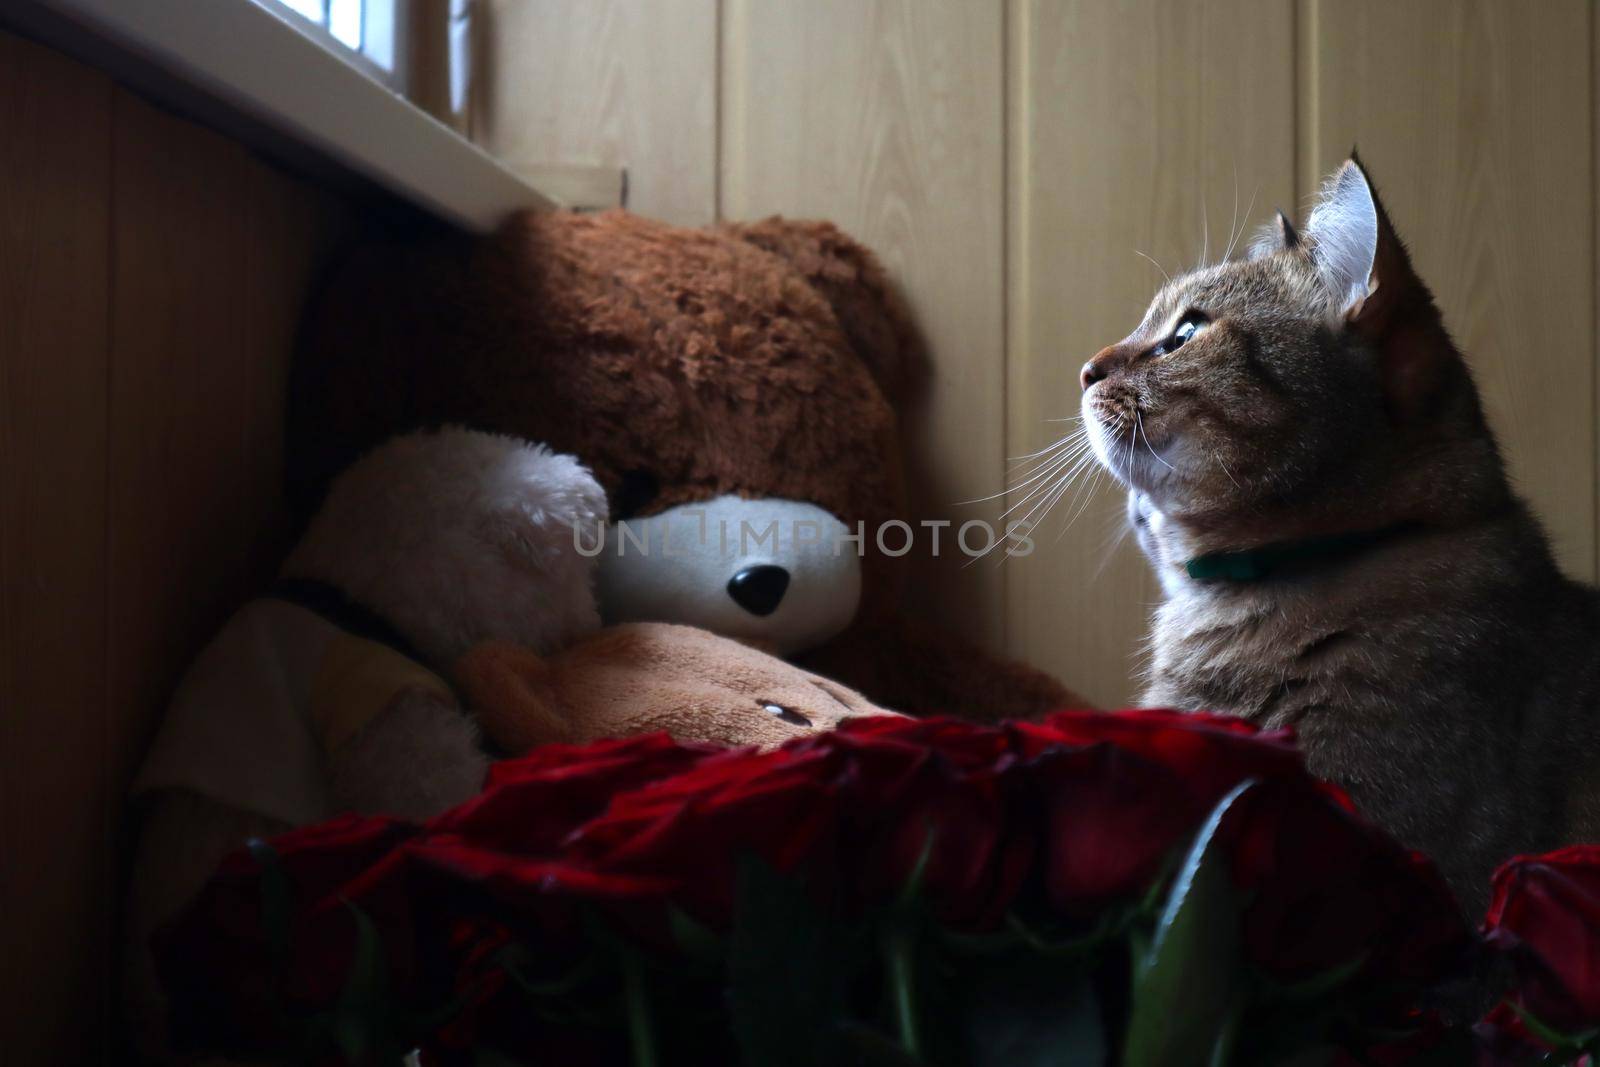 A cat sits on a sofa and looks out the window in the foreground of a red rose